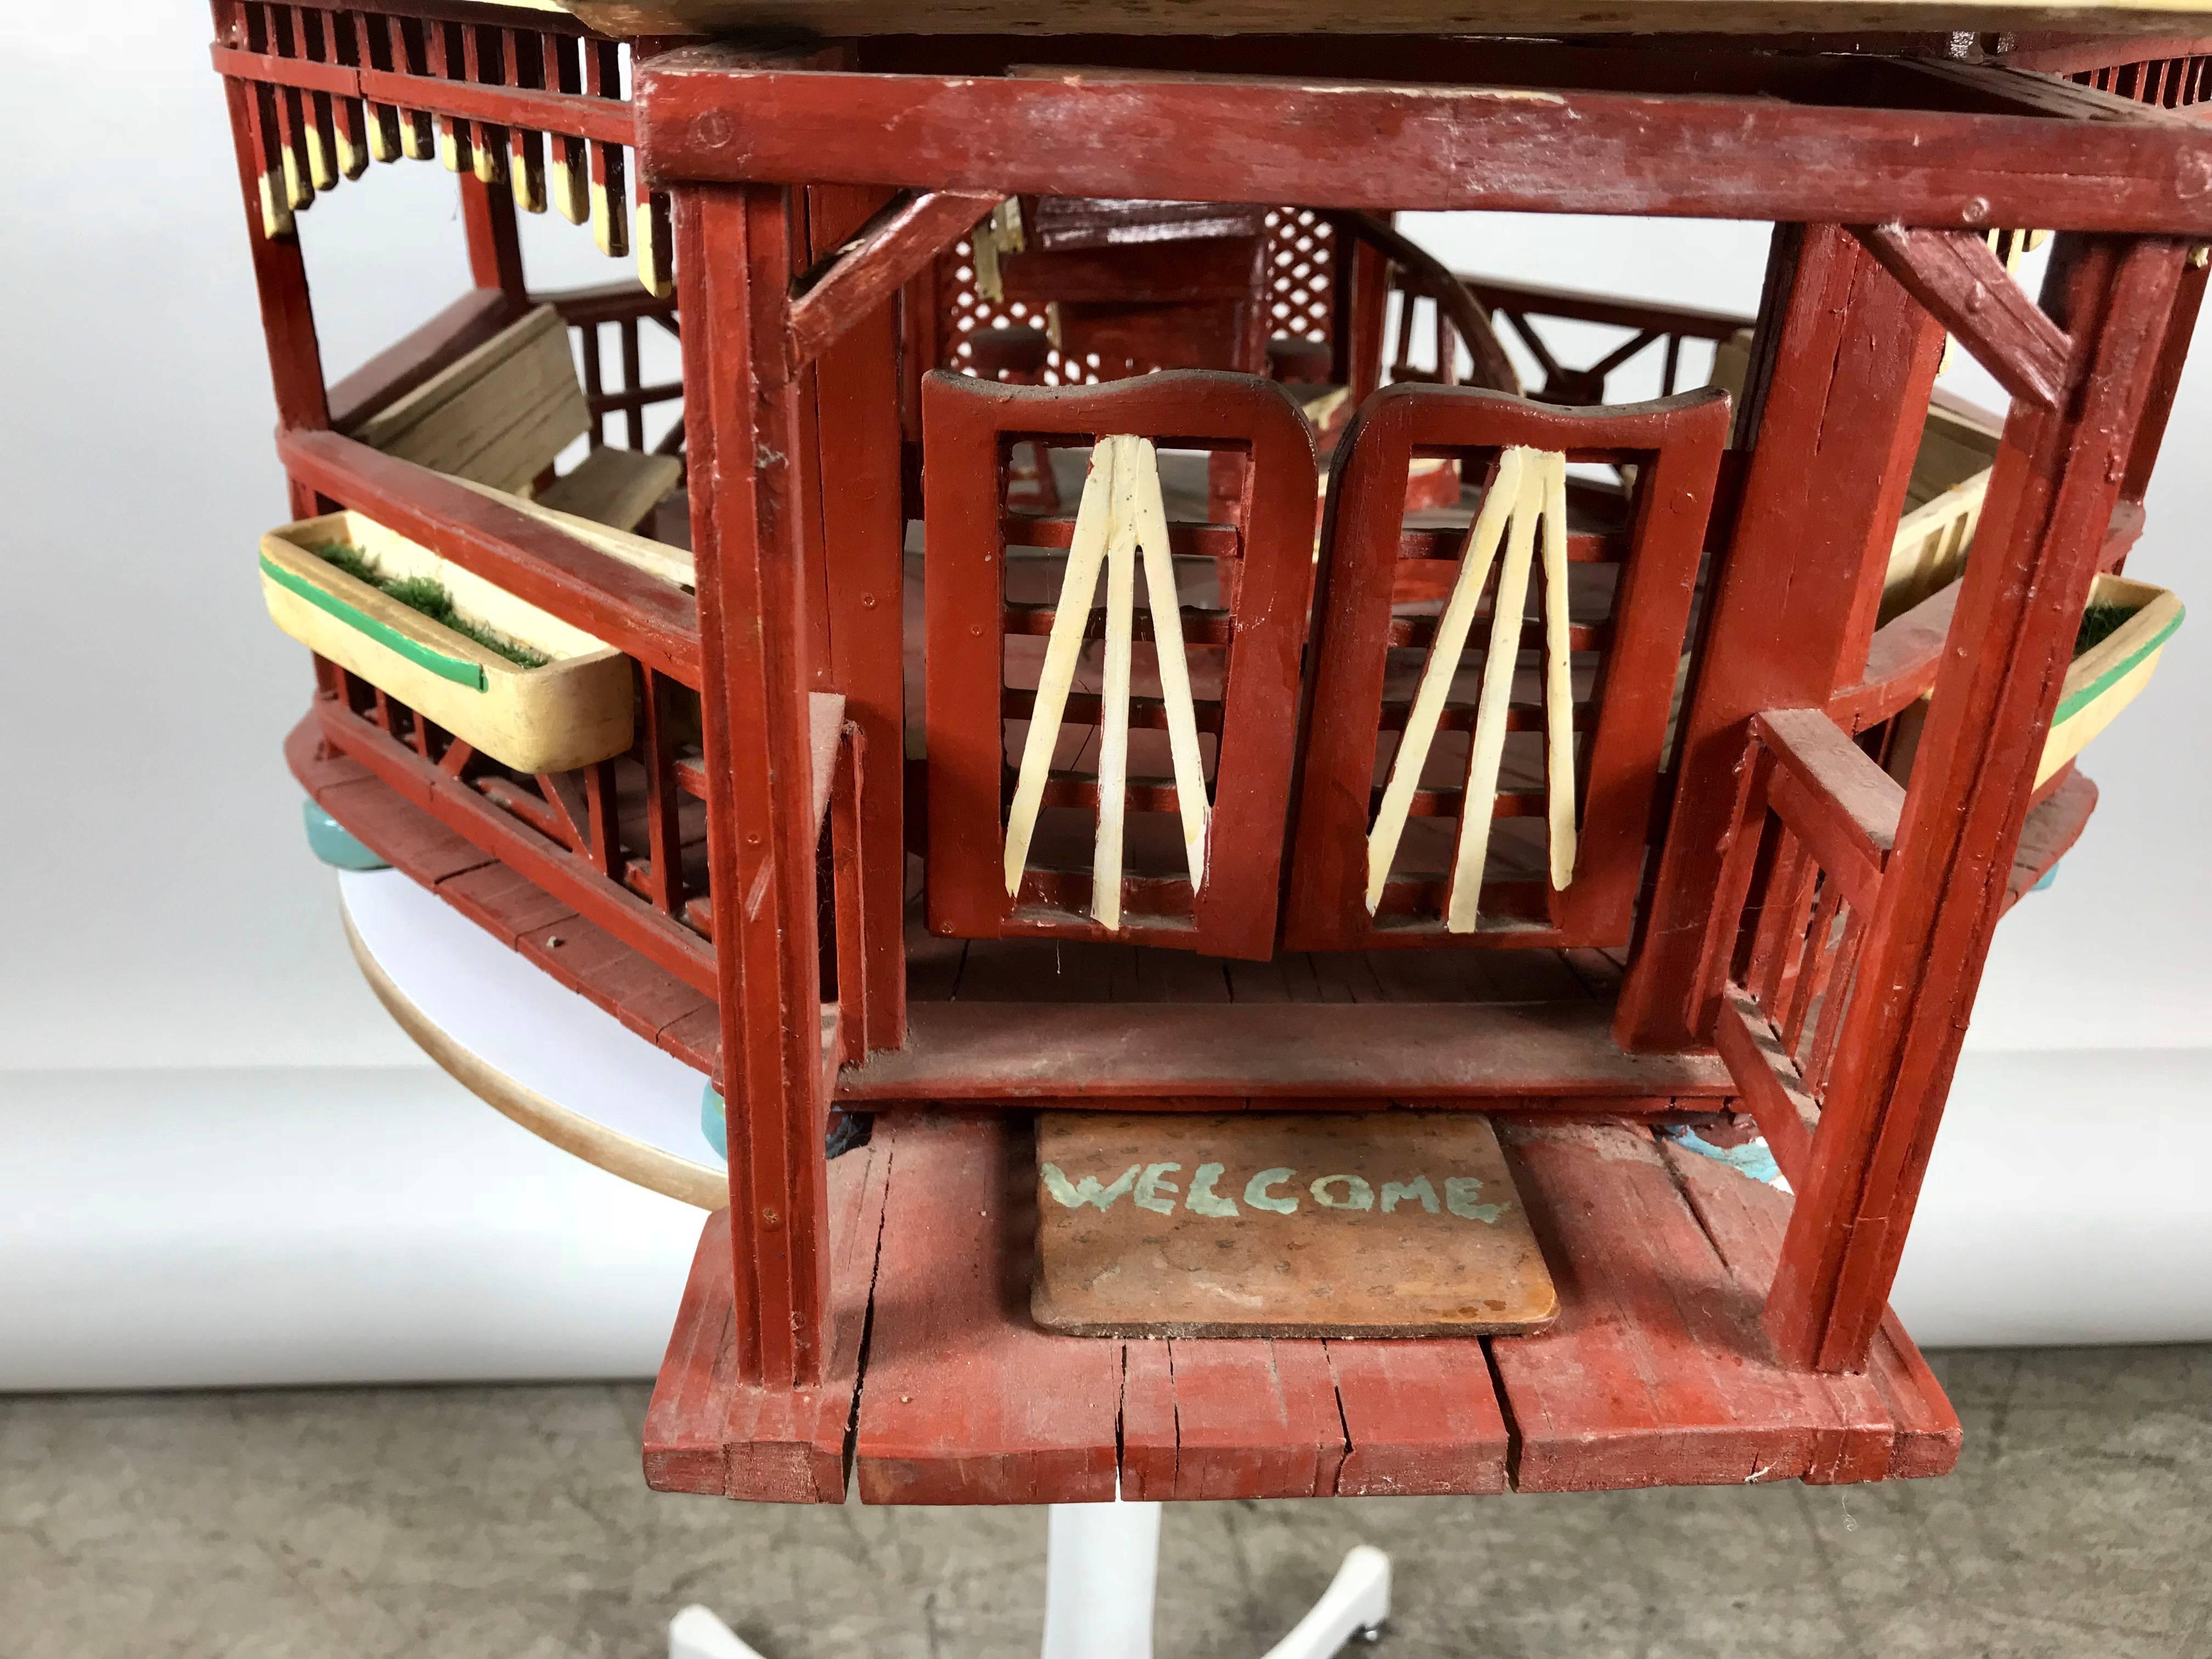 Handmade Folk Art Gazibo / house. All wood construction,, features spiral staircase, benches and stools on the interior, slat wood roof, railing detail. Swinging doors, screened windows, planter boxes, charming design.